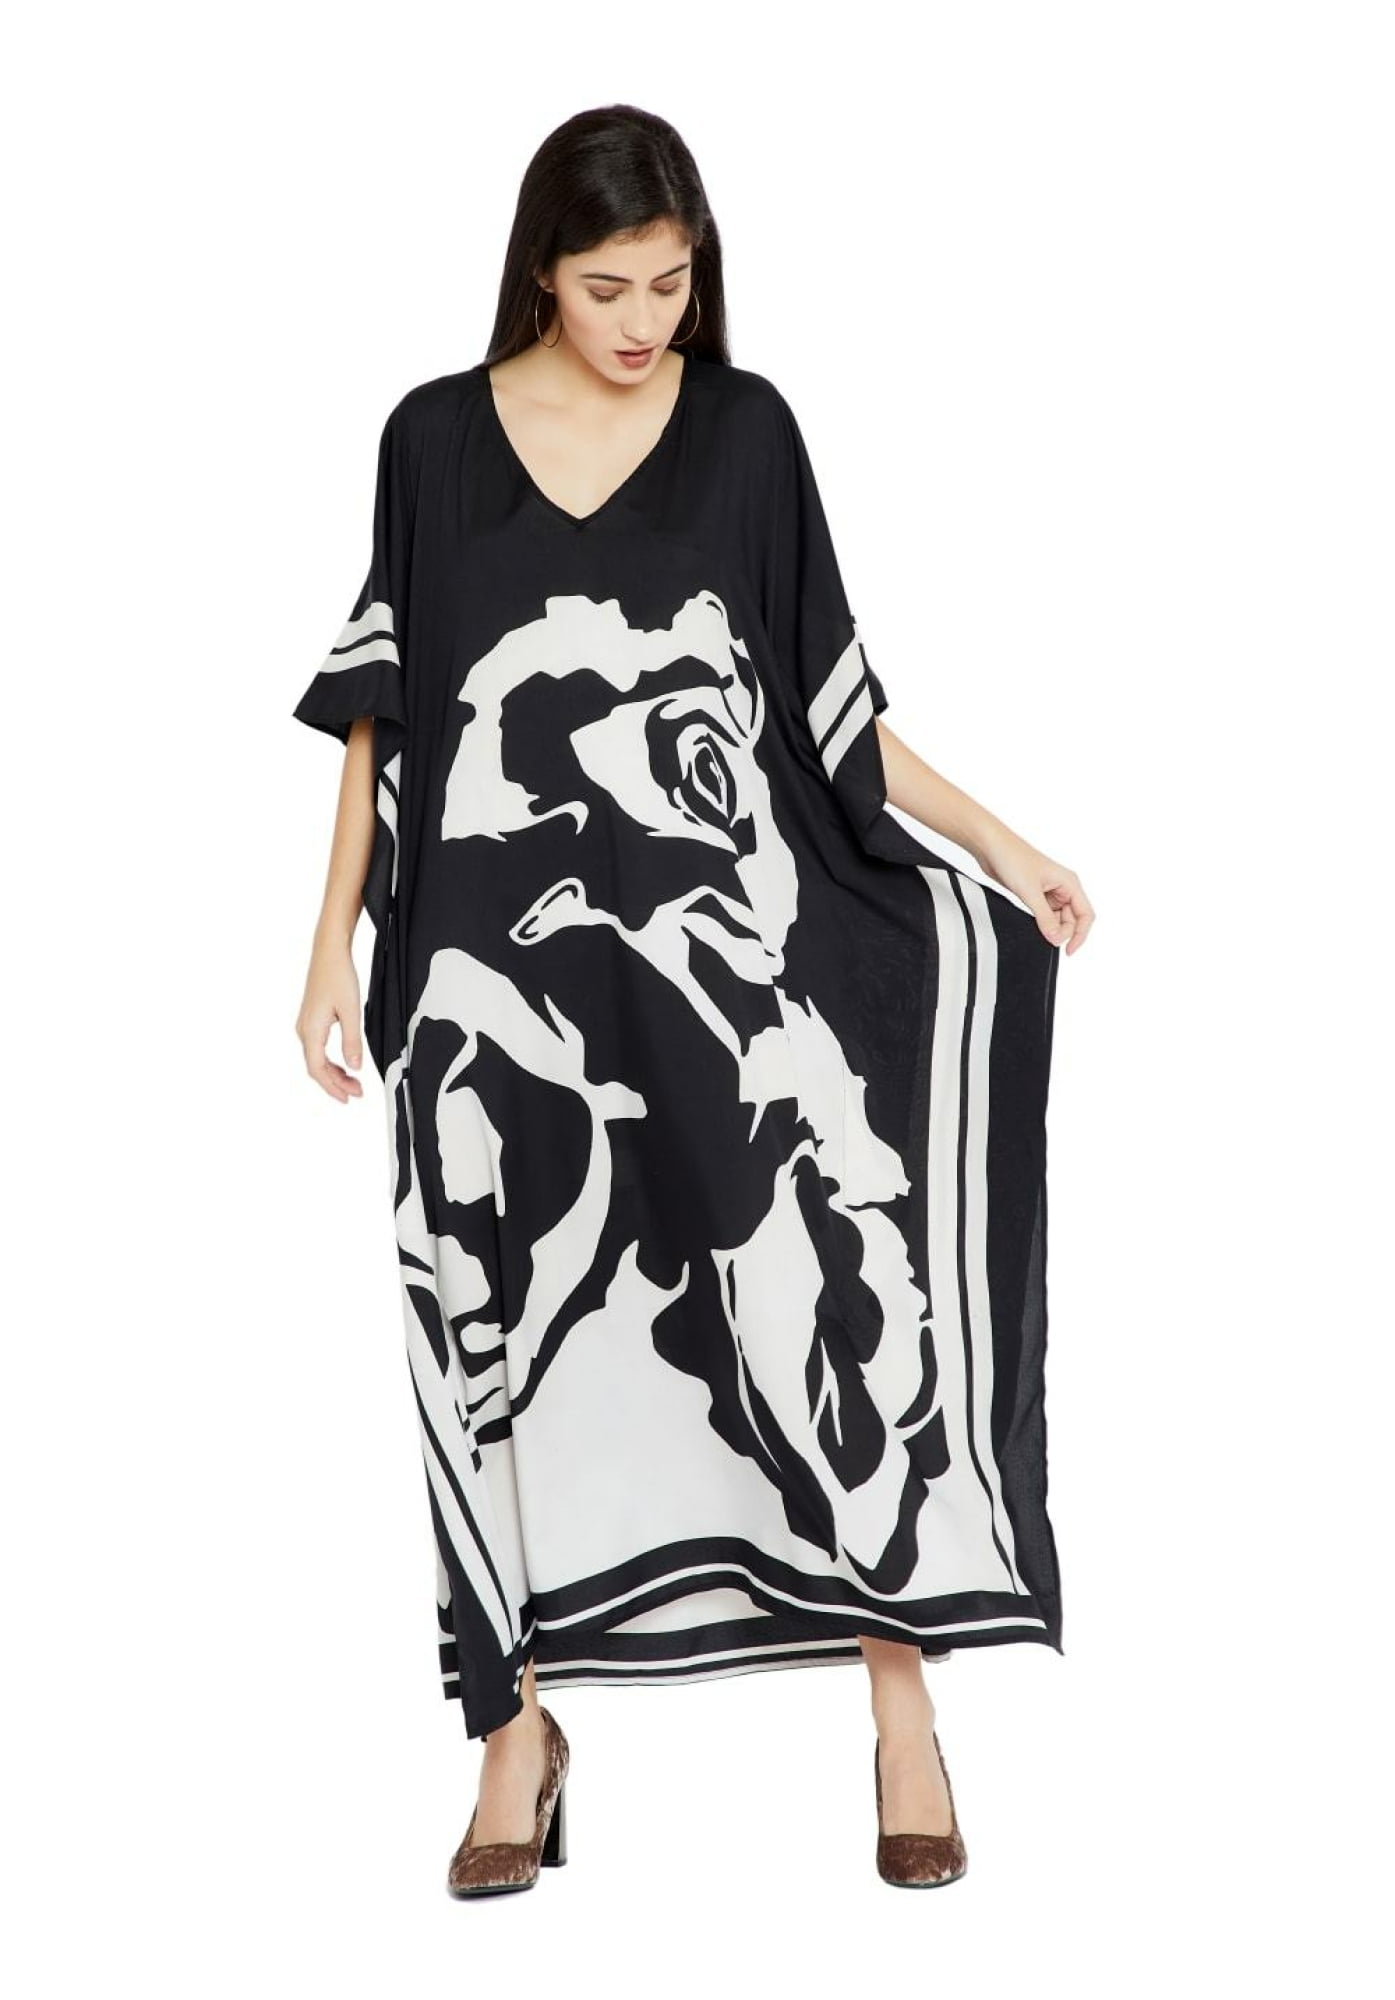 Black Caftans for Women Rose Printed Plus Size Kaftan Dresses for Women Plus Size Ladies Kaftan Long Free Size Long Women Dress Online by Oussum 0bb50dc4 0df7 4282 aaf1 4d460c3f43ae.489de01ab368e427c895dc68dfb58364